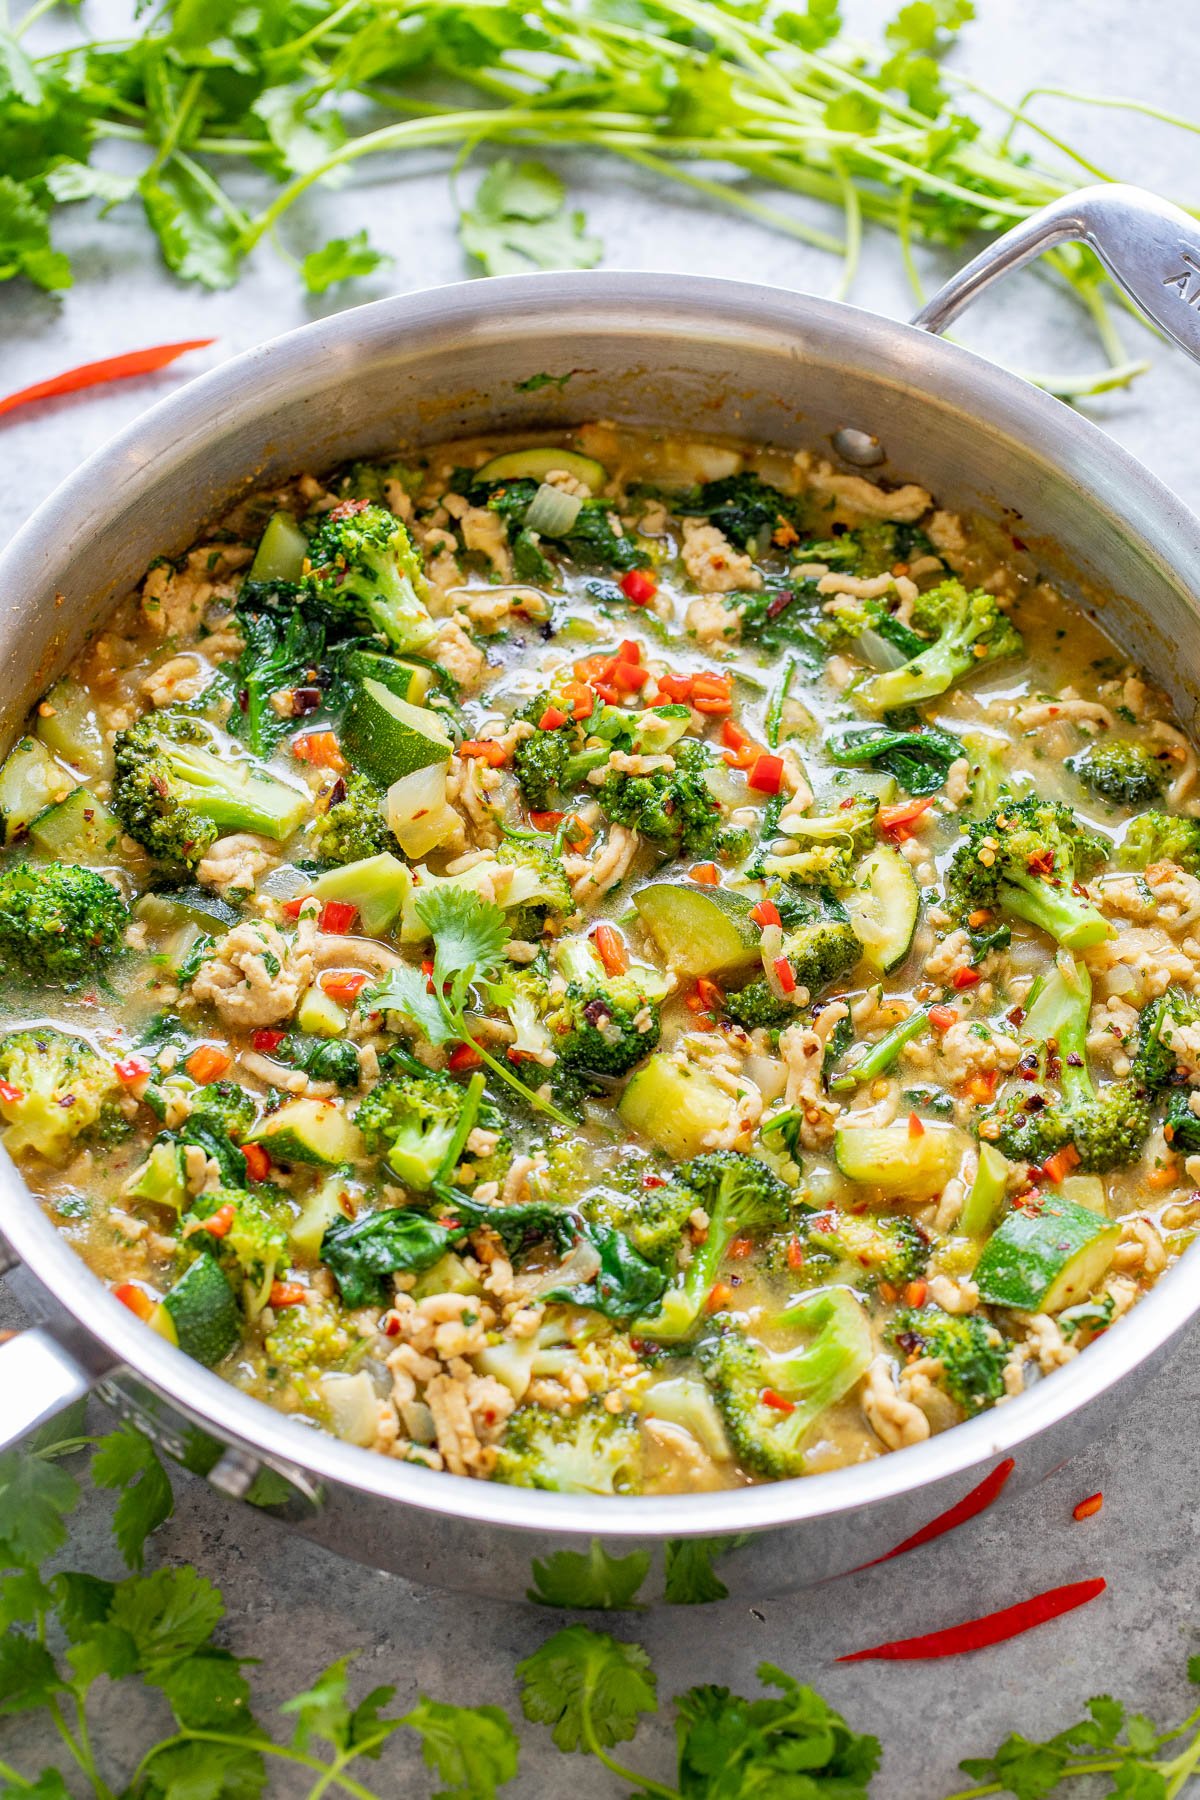 A skillet filled with a colorful, spicy chicken and vegetable green coconut curry garnished with fresh herbs.